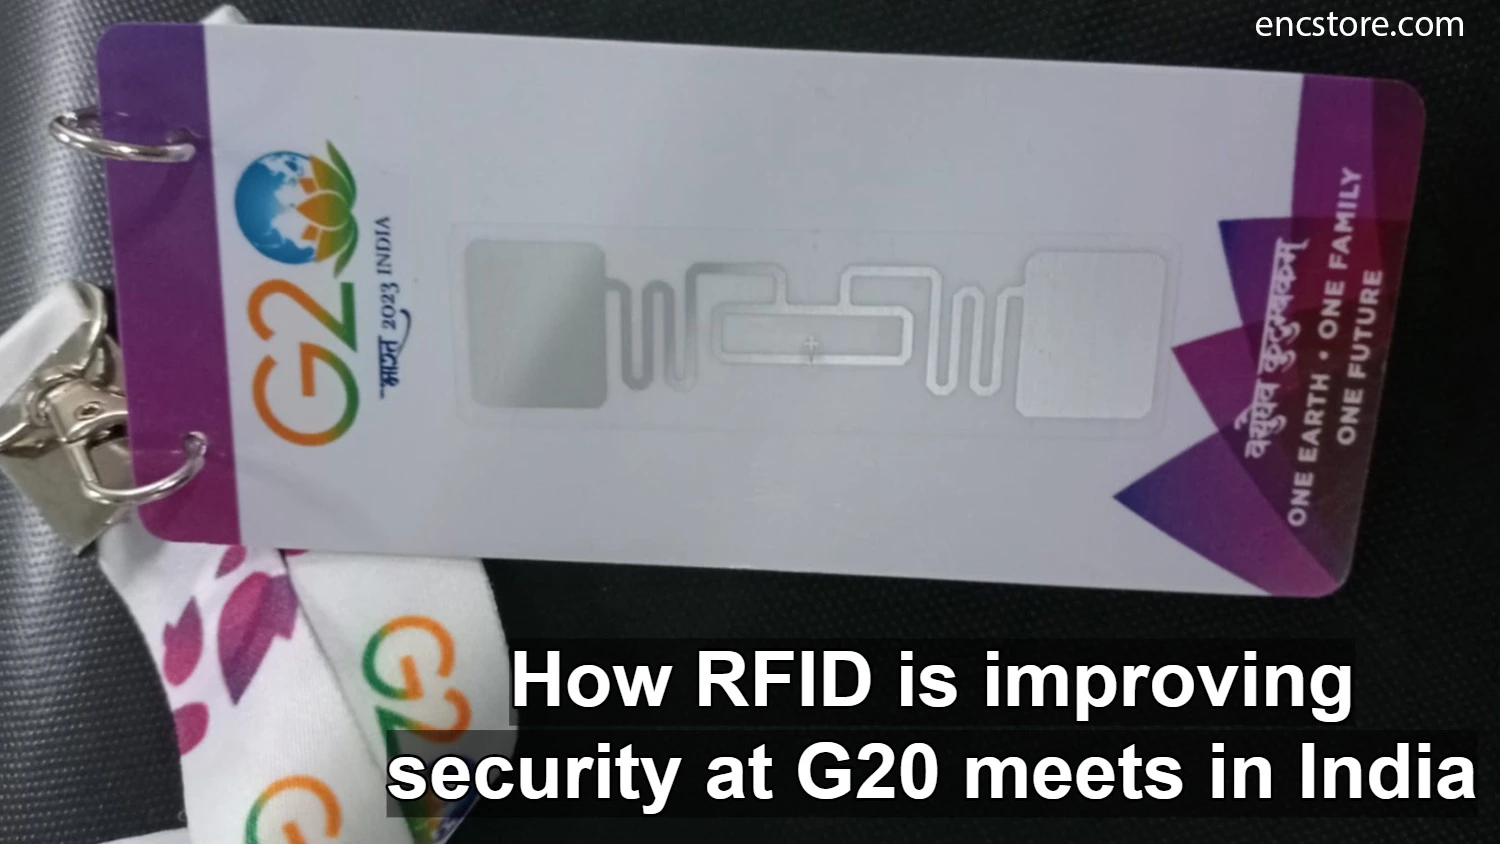 How RFID is improving security at G20 meets